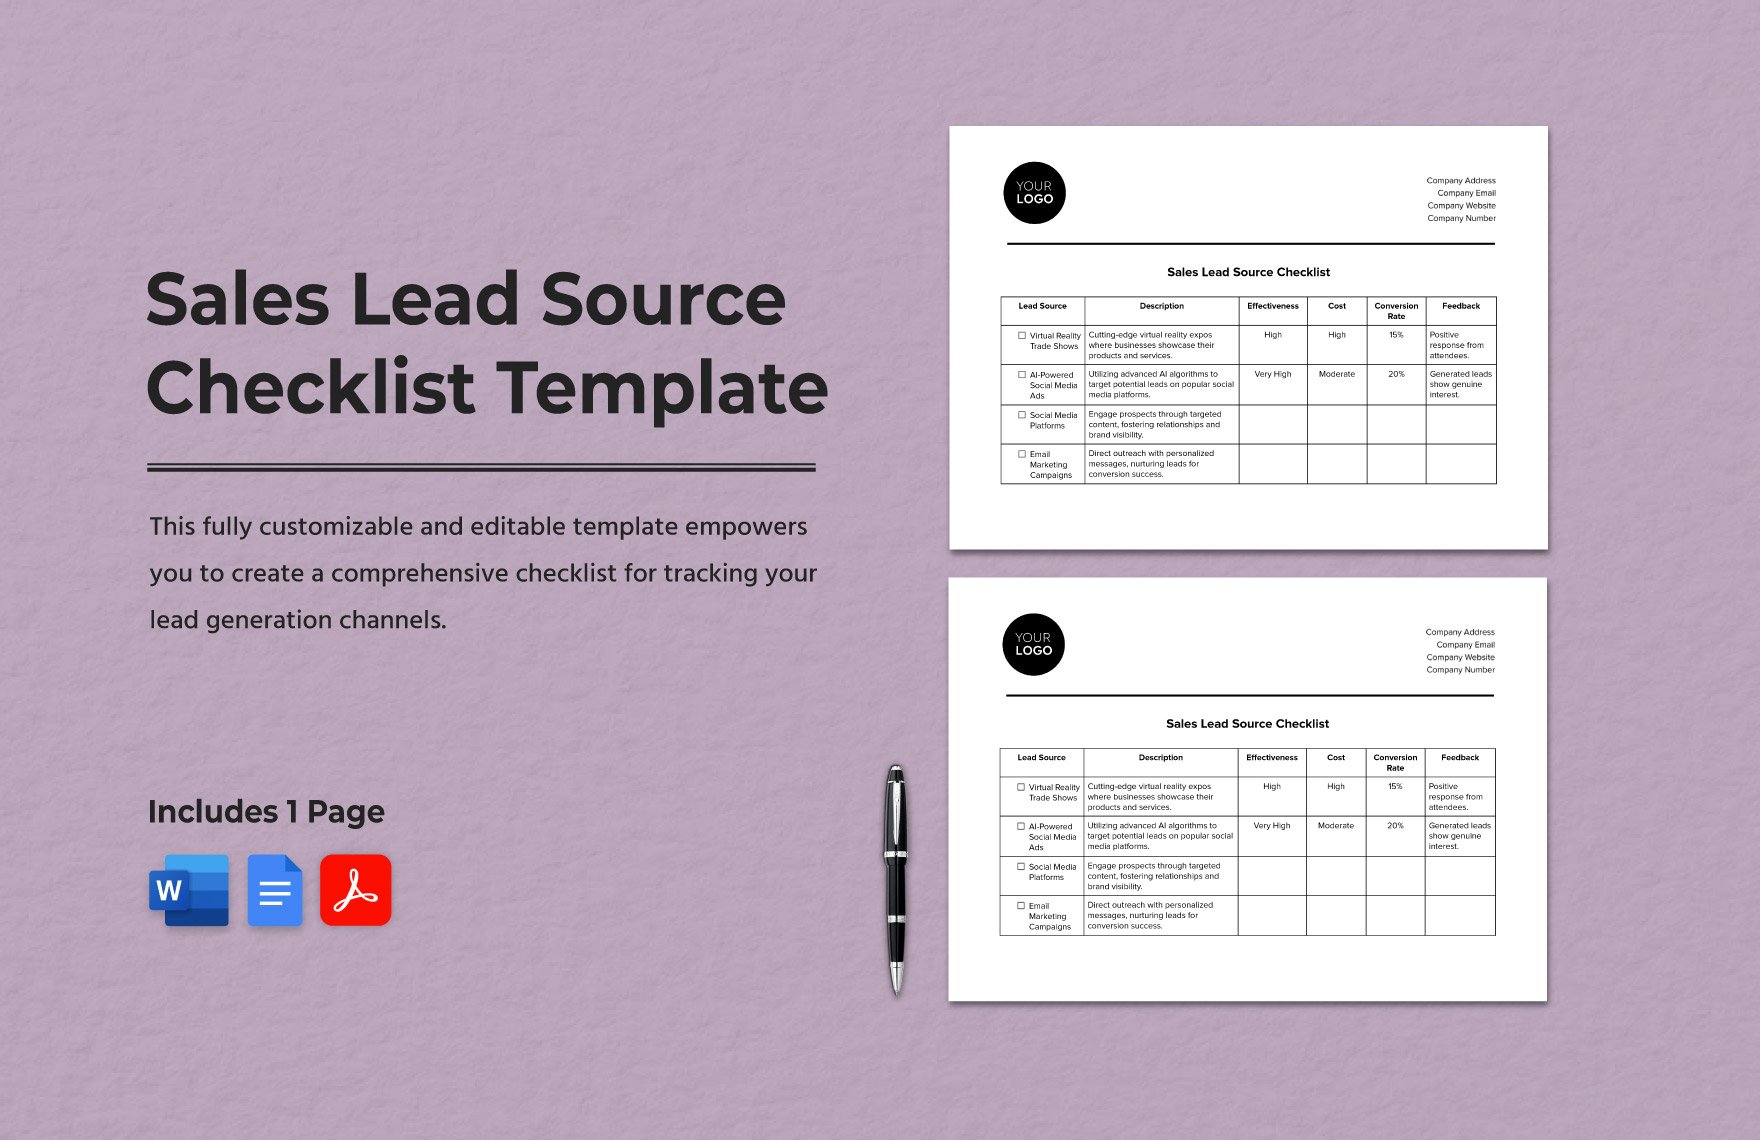 Sales Lead Source Checklist Template in Word, Google Docs, PDF